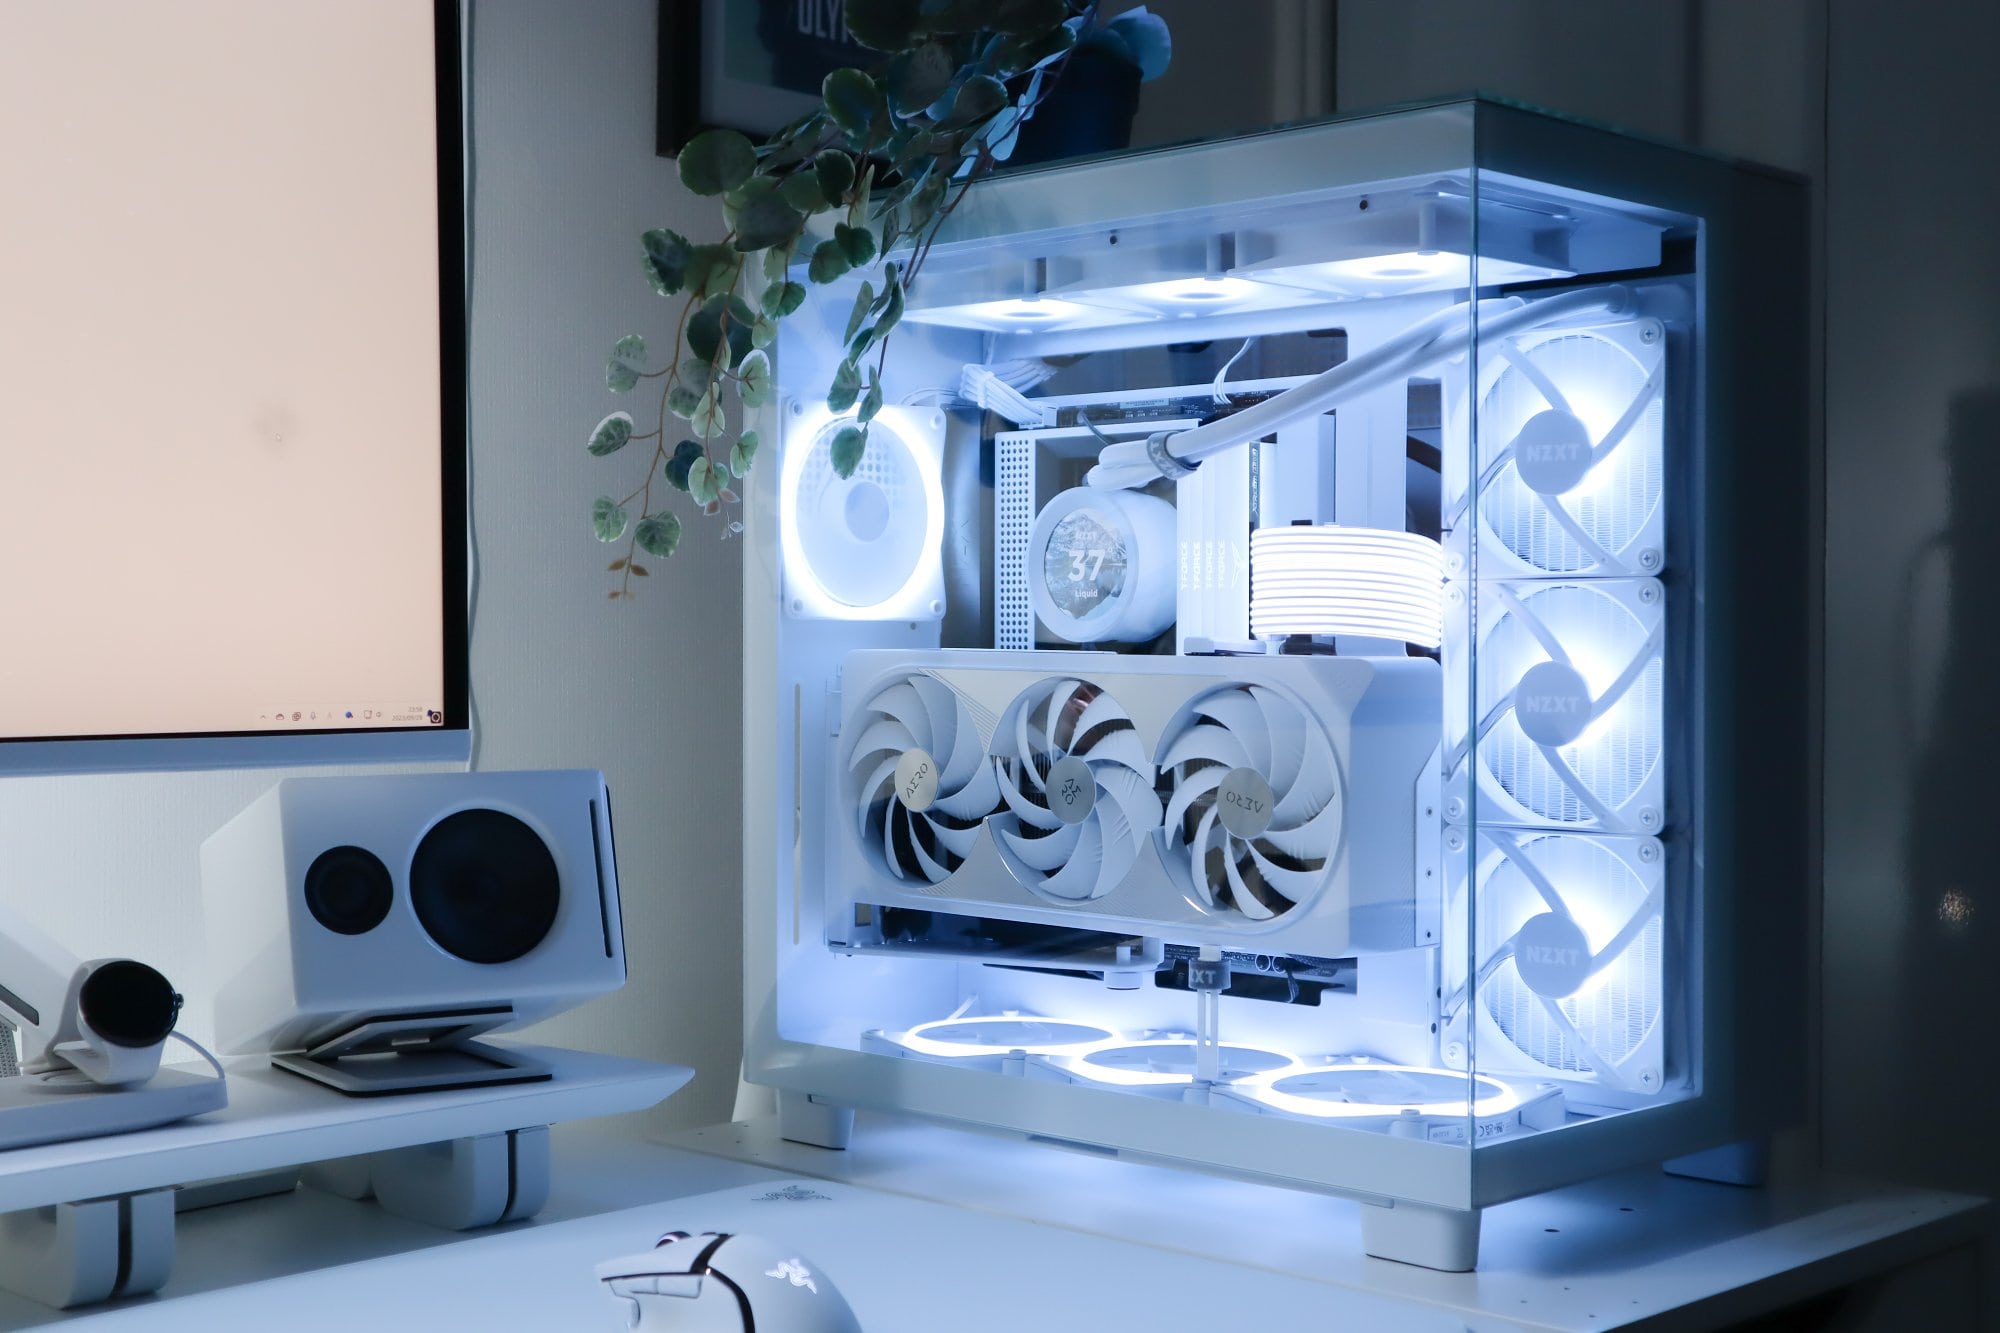 A high-end custom PC build with a clear glass case, showcasing white components and LED fans, alongside a sleek desktop setup with matching white peripherals, complemented by ambient blue lighting